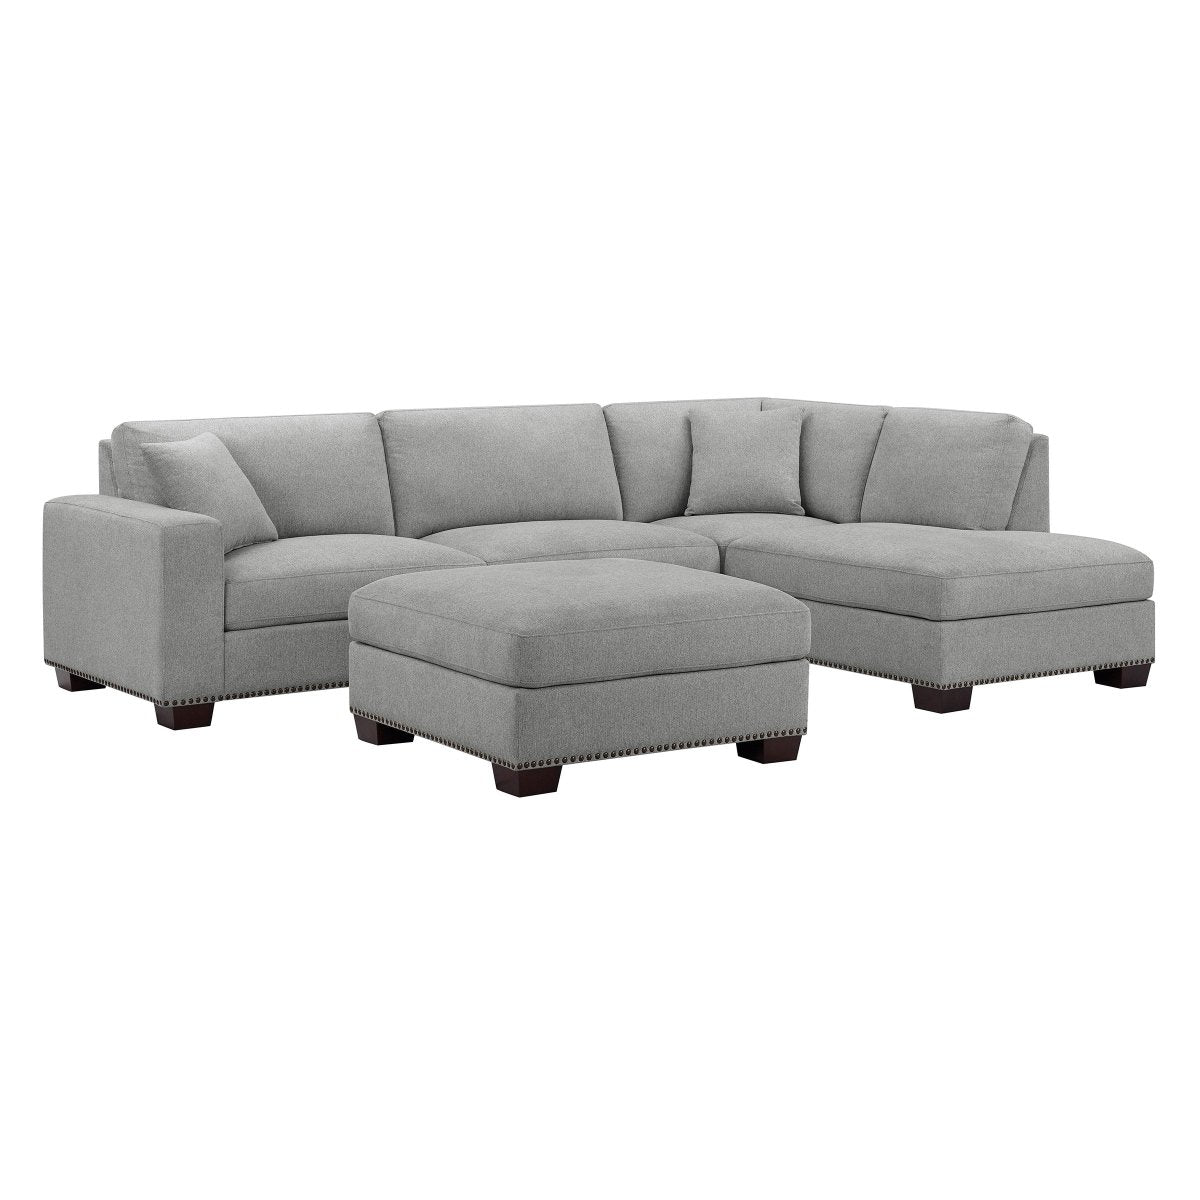 Thomasville Artesia Fabric Sectional with Ottoman - Alpine Outlets